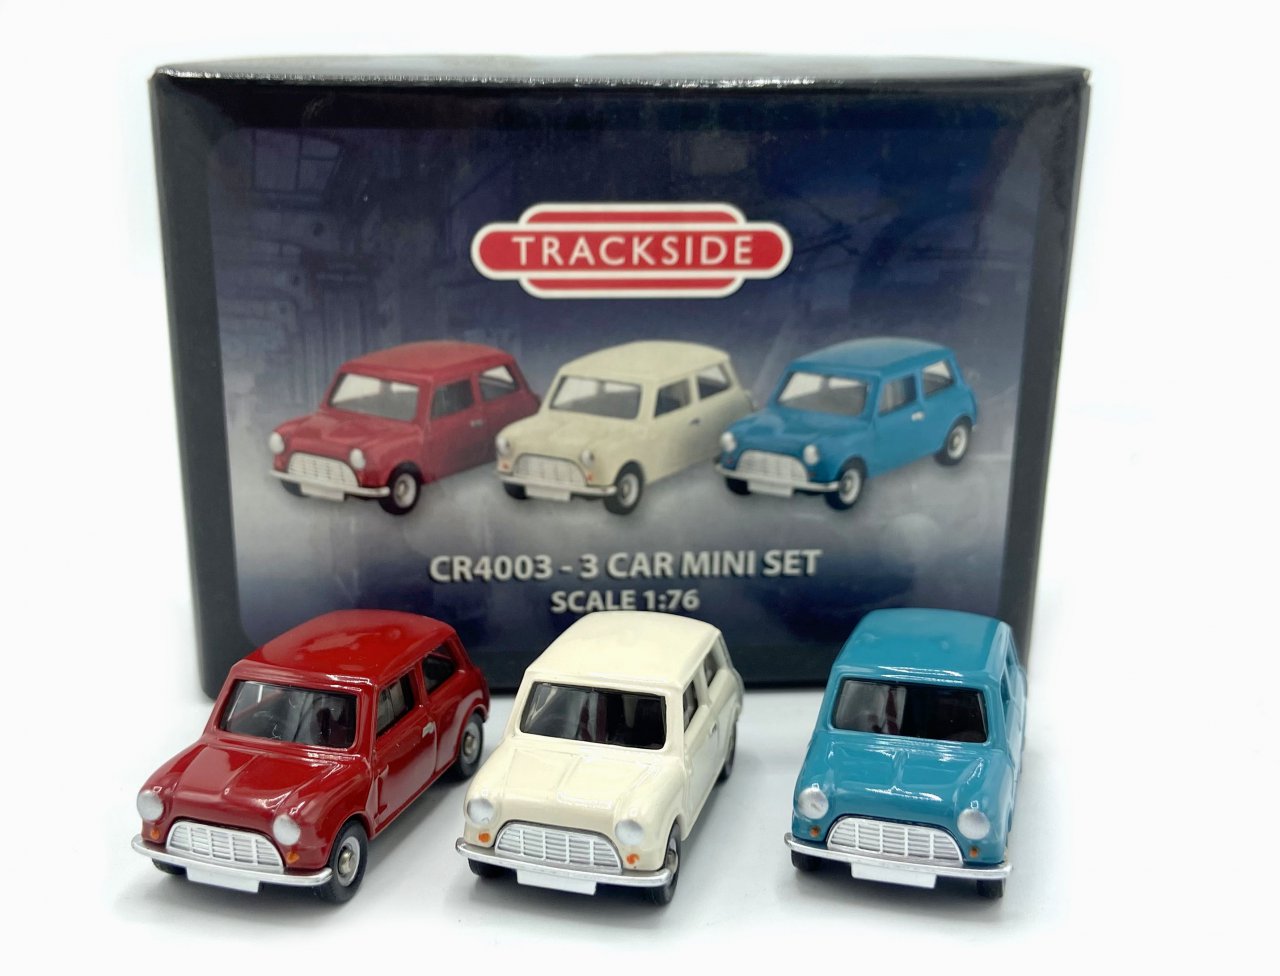 miniature cars, UK parts company selling its collection of miniature cars, ClassicCars.com Journal